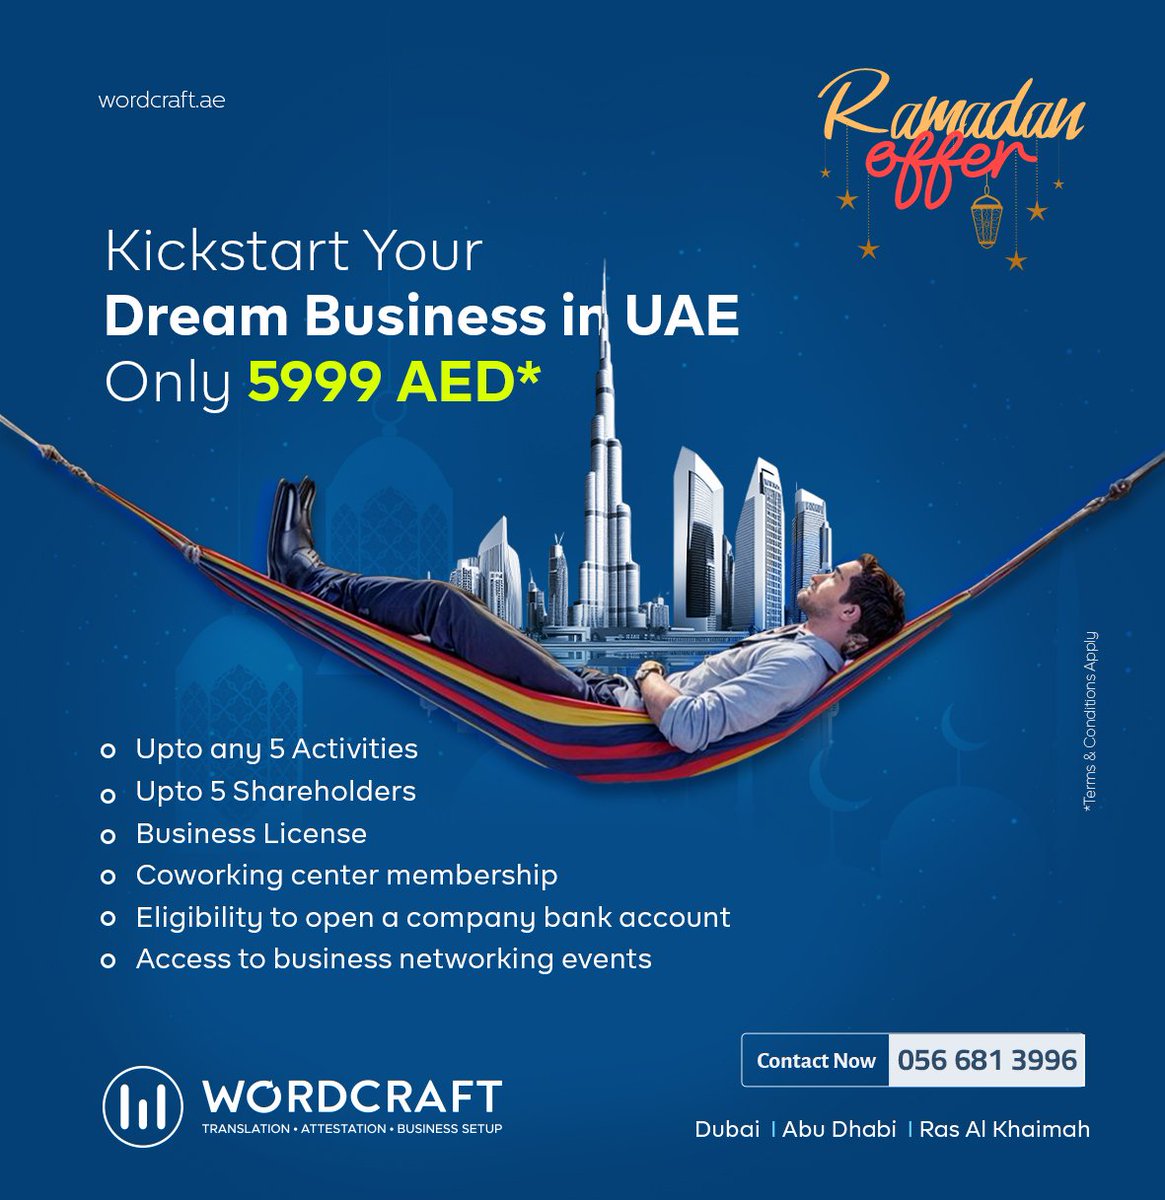 Ramadan Special Offer!

Now you can start your own business in just 5999 AED*
*T&C Apply
#businesssetup #businesssetupuae #businesssetupinuae #businesssetupdubai #BusinessSetupInDubai #businesssetupindubai #businesssetupservices #businesssetupconsultants #businesssetupconsultants